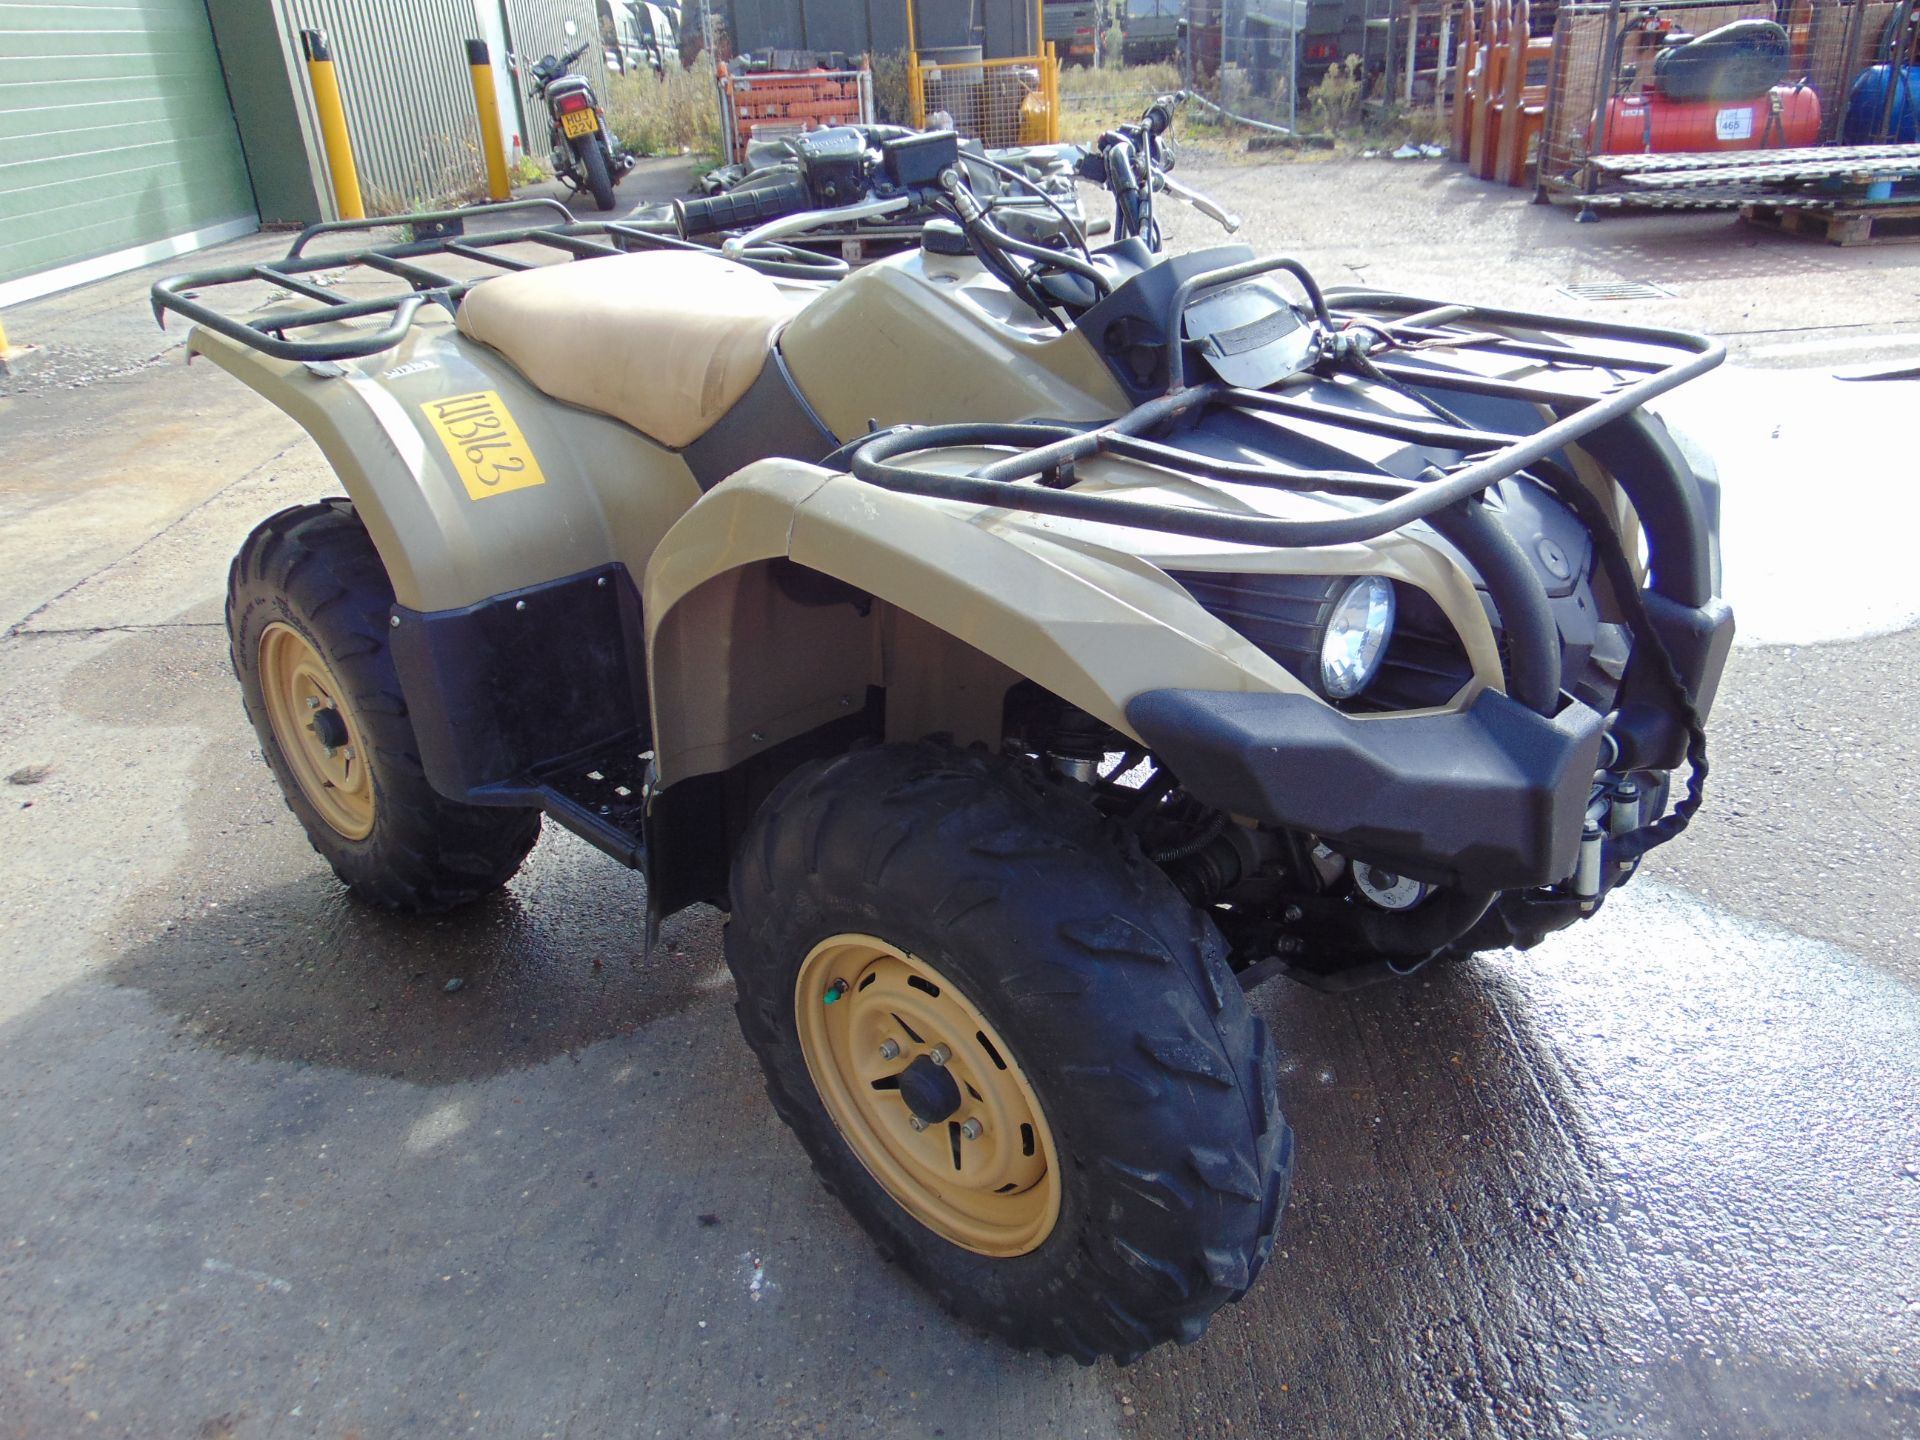 Military Specification Yamaha Grizzly 450 4 x 4 ATV Quad Bike ONLY 214 HOURS!!! - Image 3 of 22